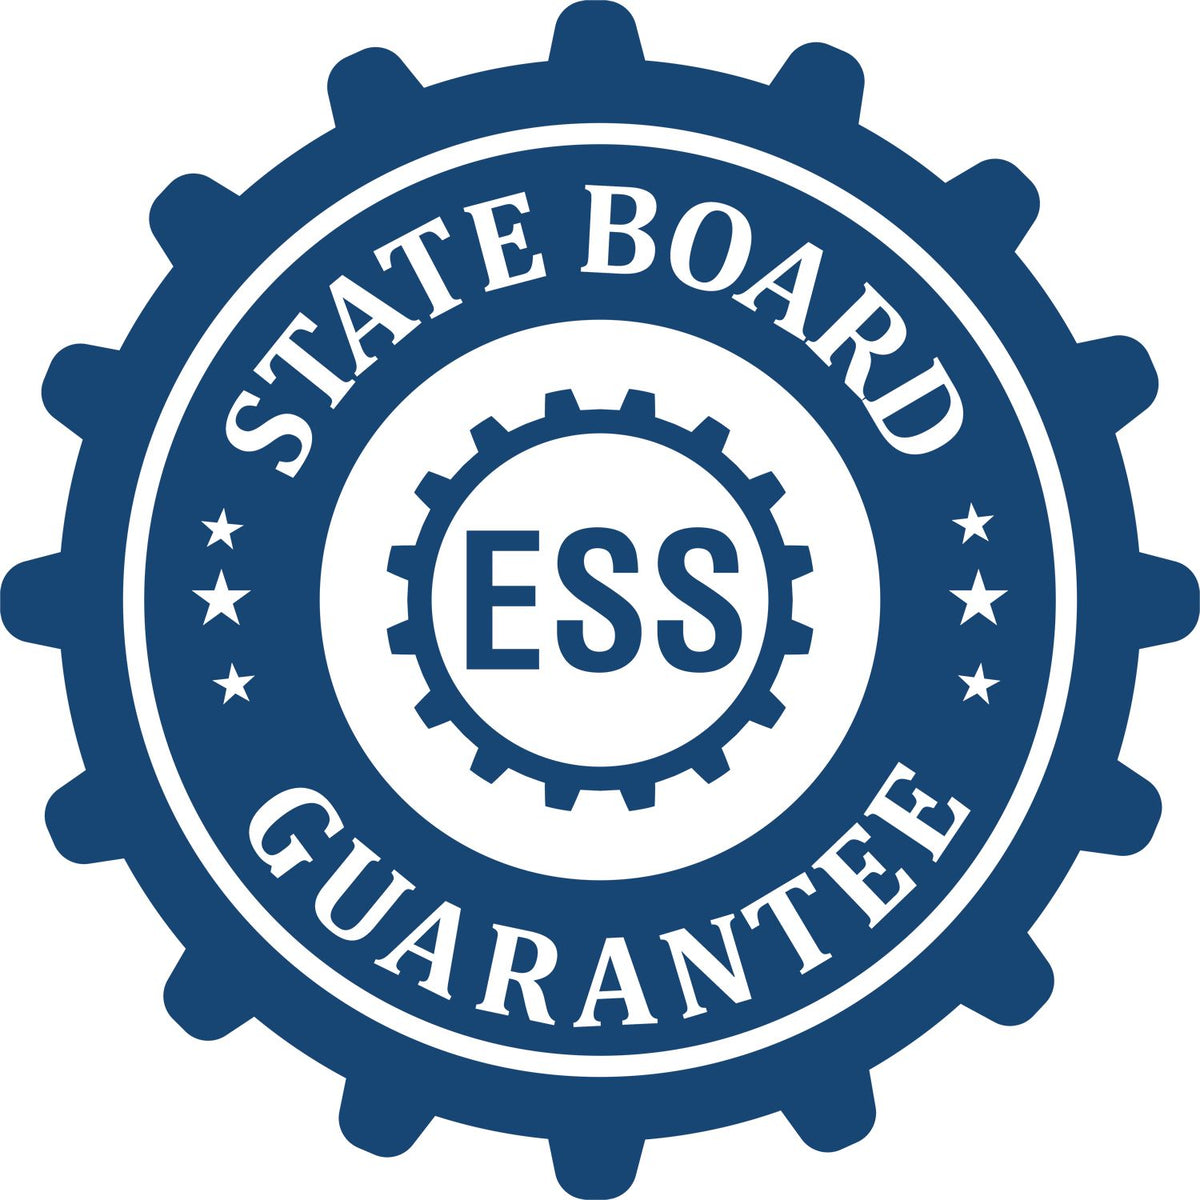 An emblem in a gear shape illustrating a state board guarantee for the State of Arkansas Extended Long Reach Engineer Seal product.